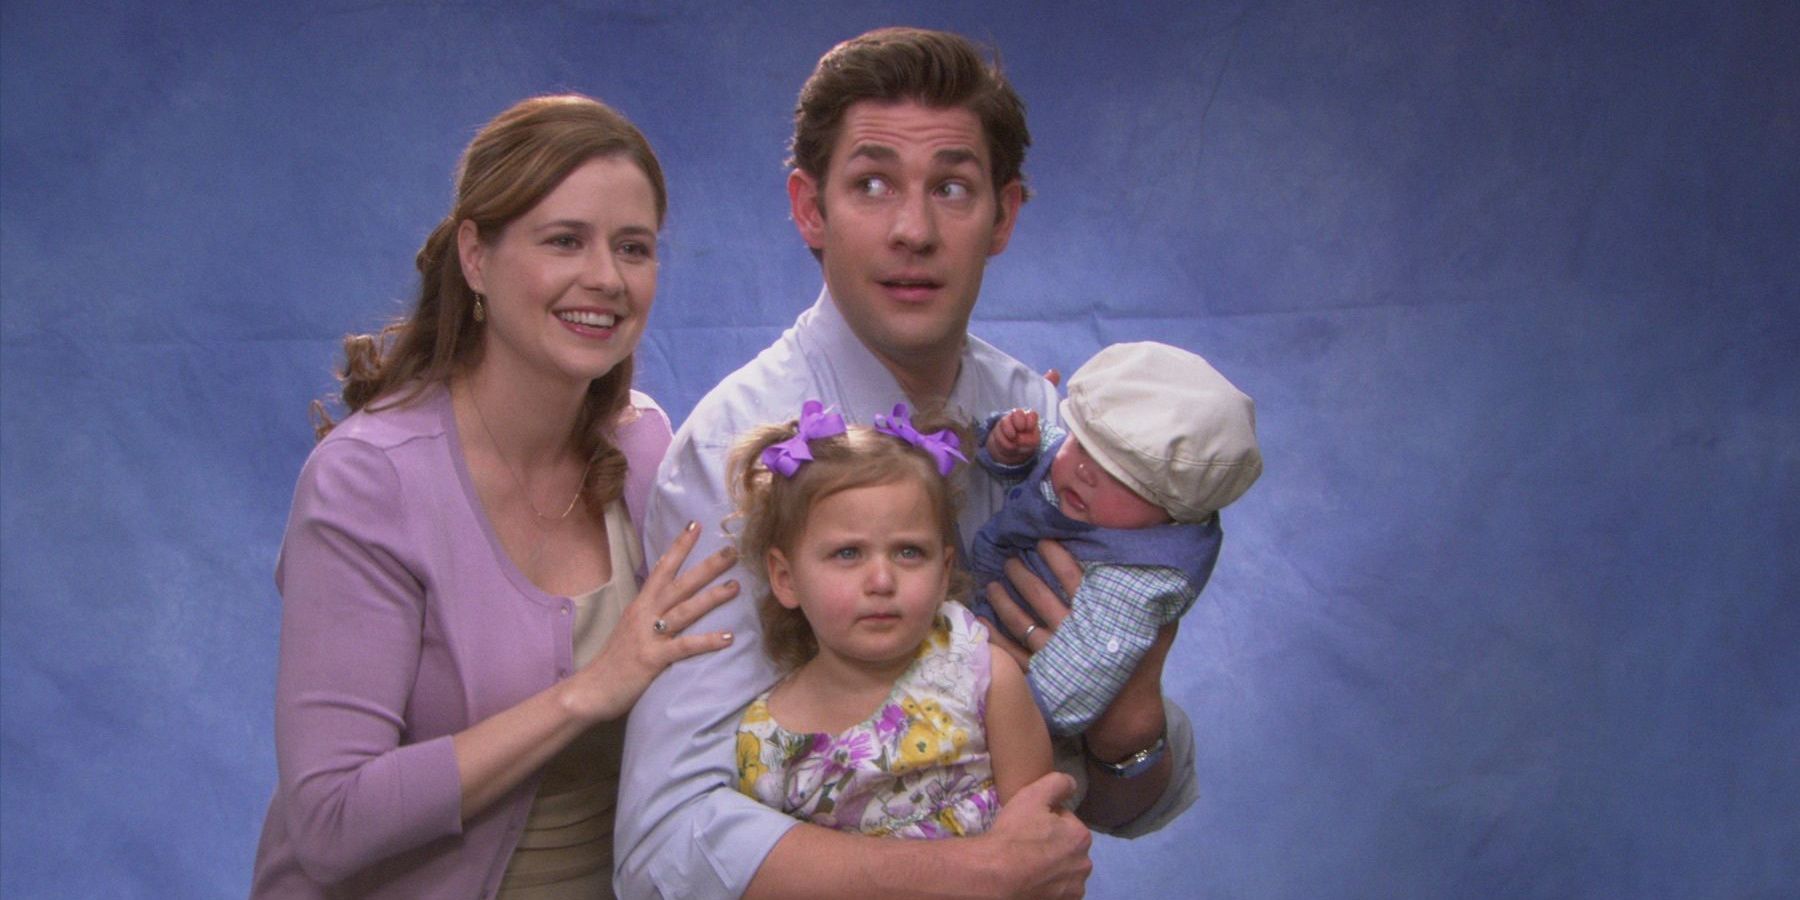 John Krasinski and Jenna Fischer and Jim and Pam Halpert taking a bizarre family picture with their two children